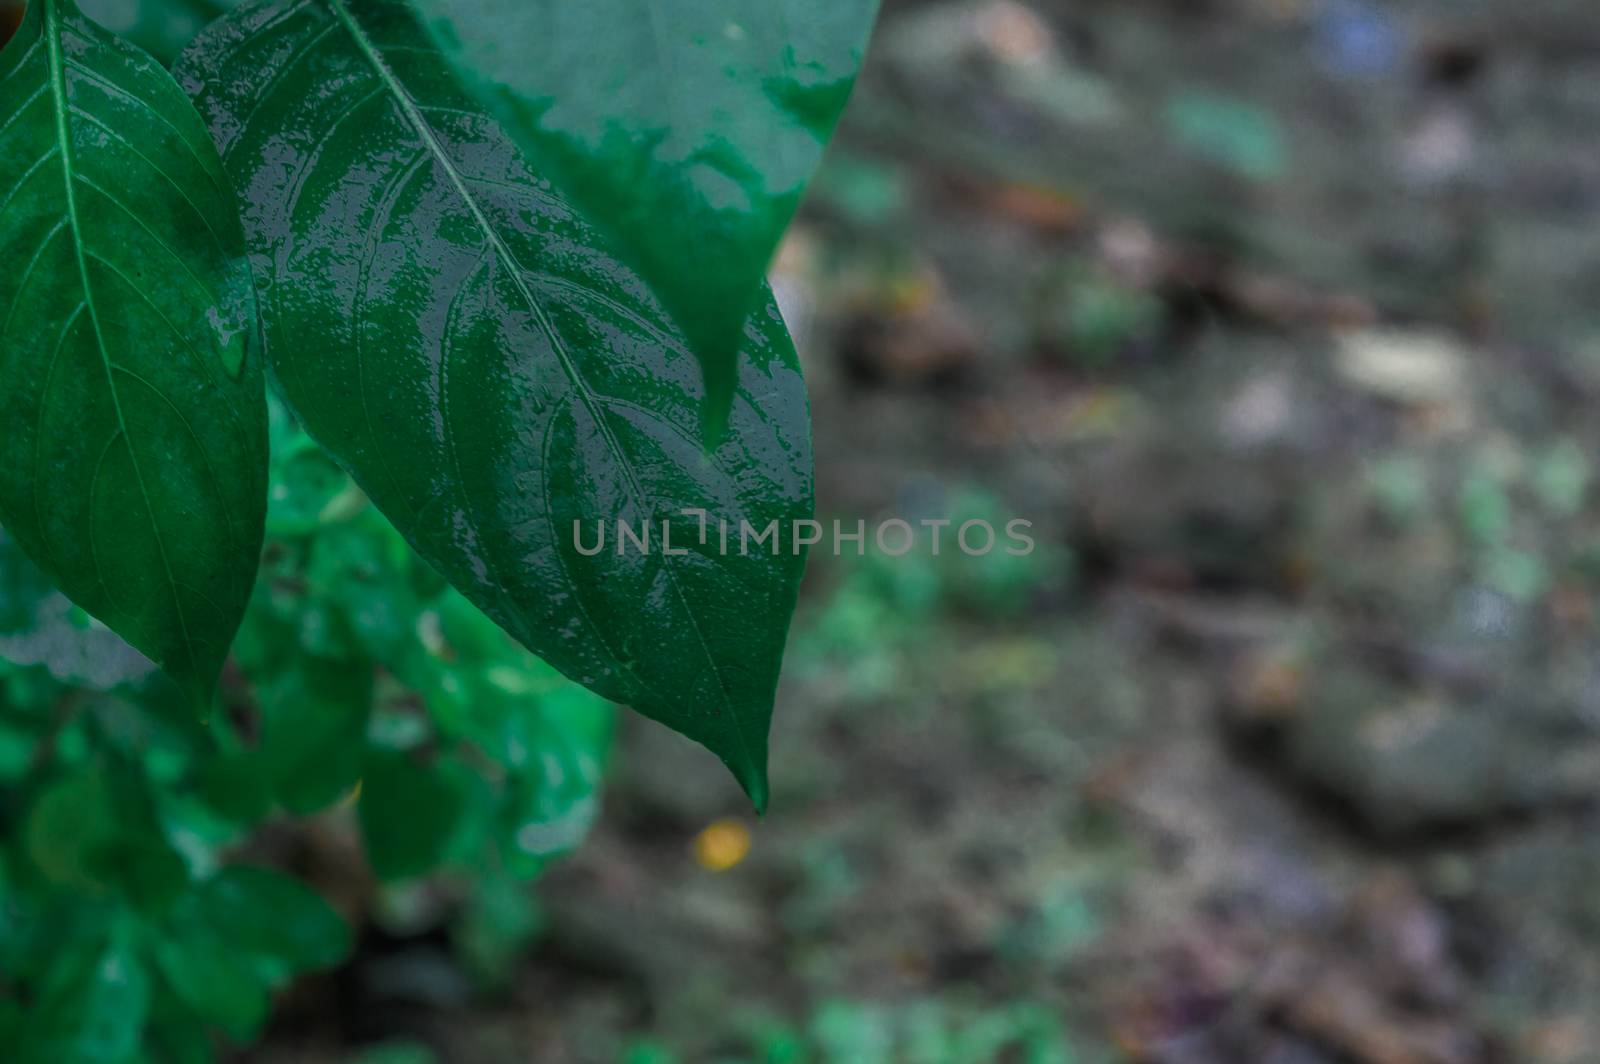 Leaves in rain. Wet in water. Beautiful Home Decor Plant drenched in rain. Green leaves background design images. Pictures of nature beauty. rainy day monsoon season pictures for wallpaper decoration.